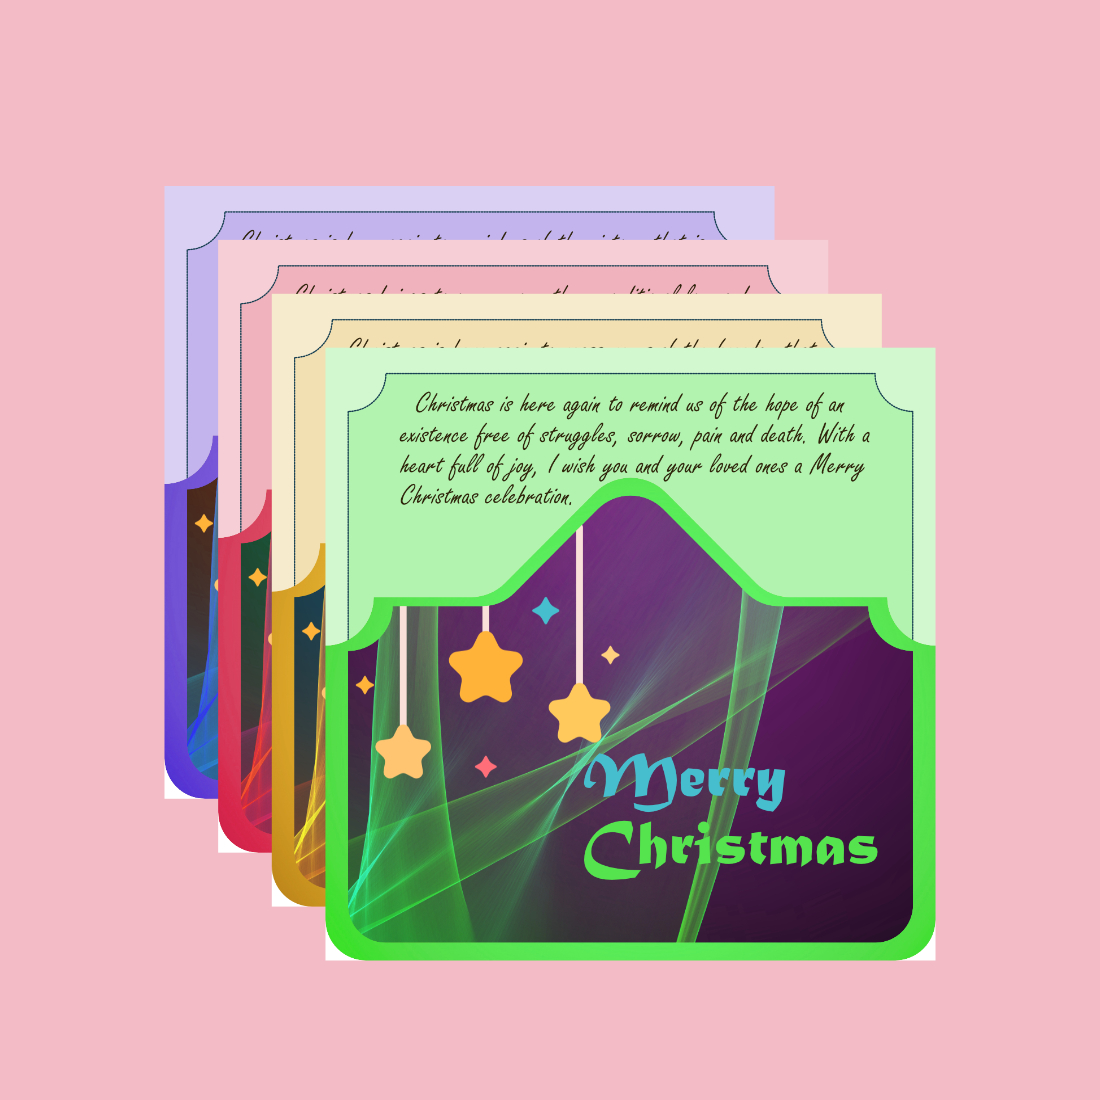 6+ Beautiful Background Christmas Cards with Inspiring Christmas Wishes cover image.